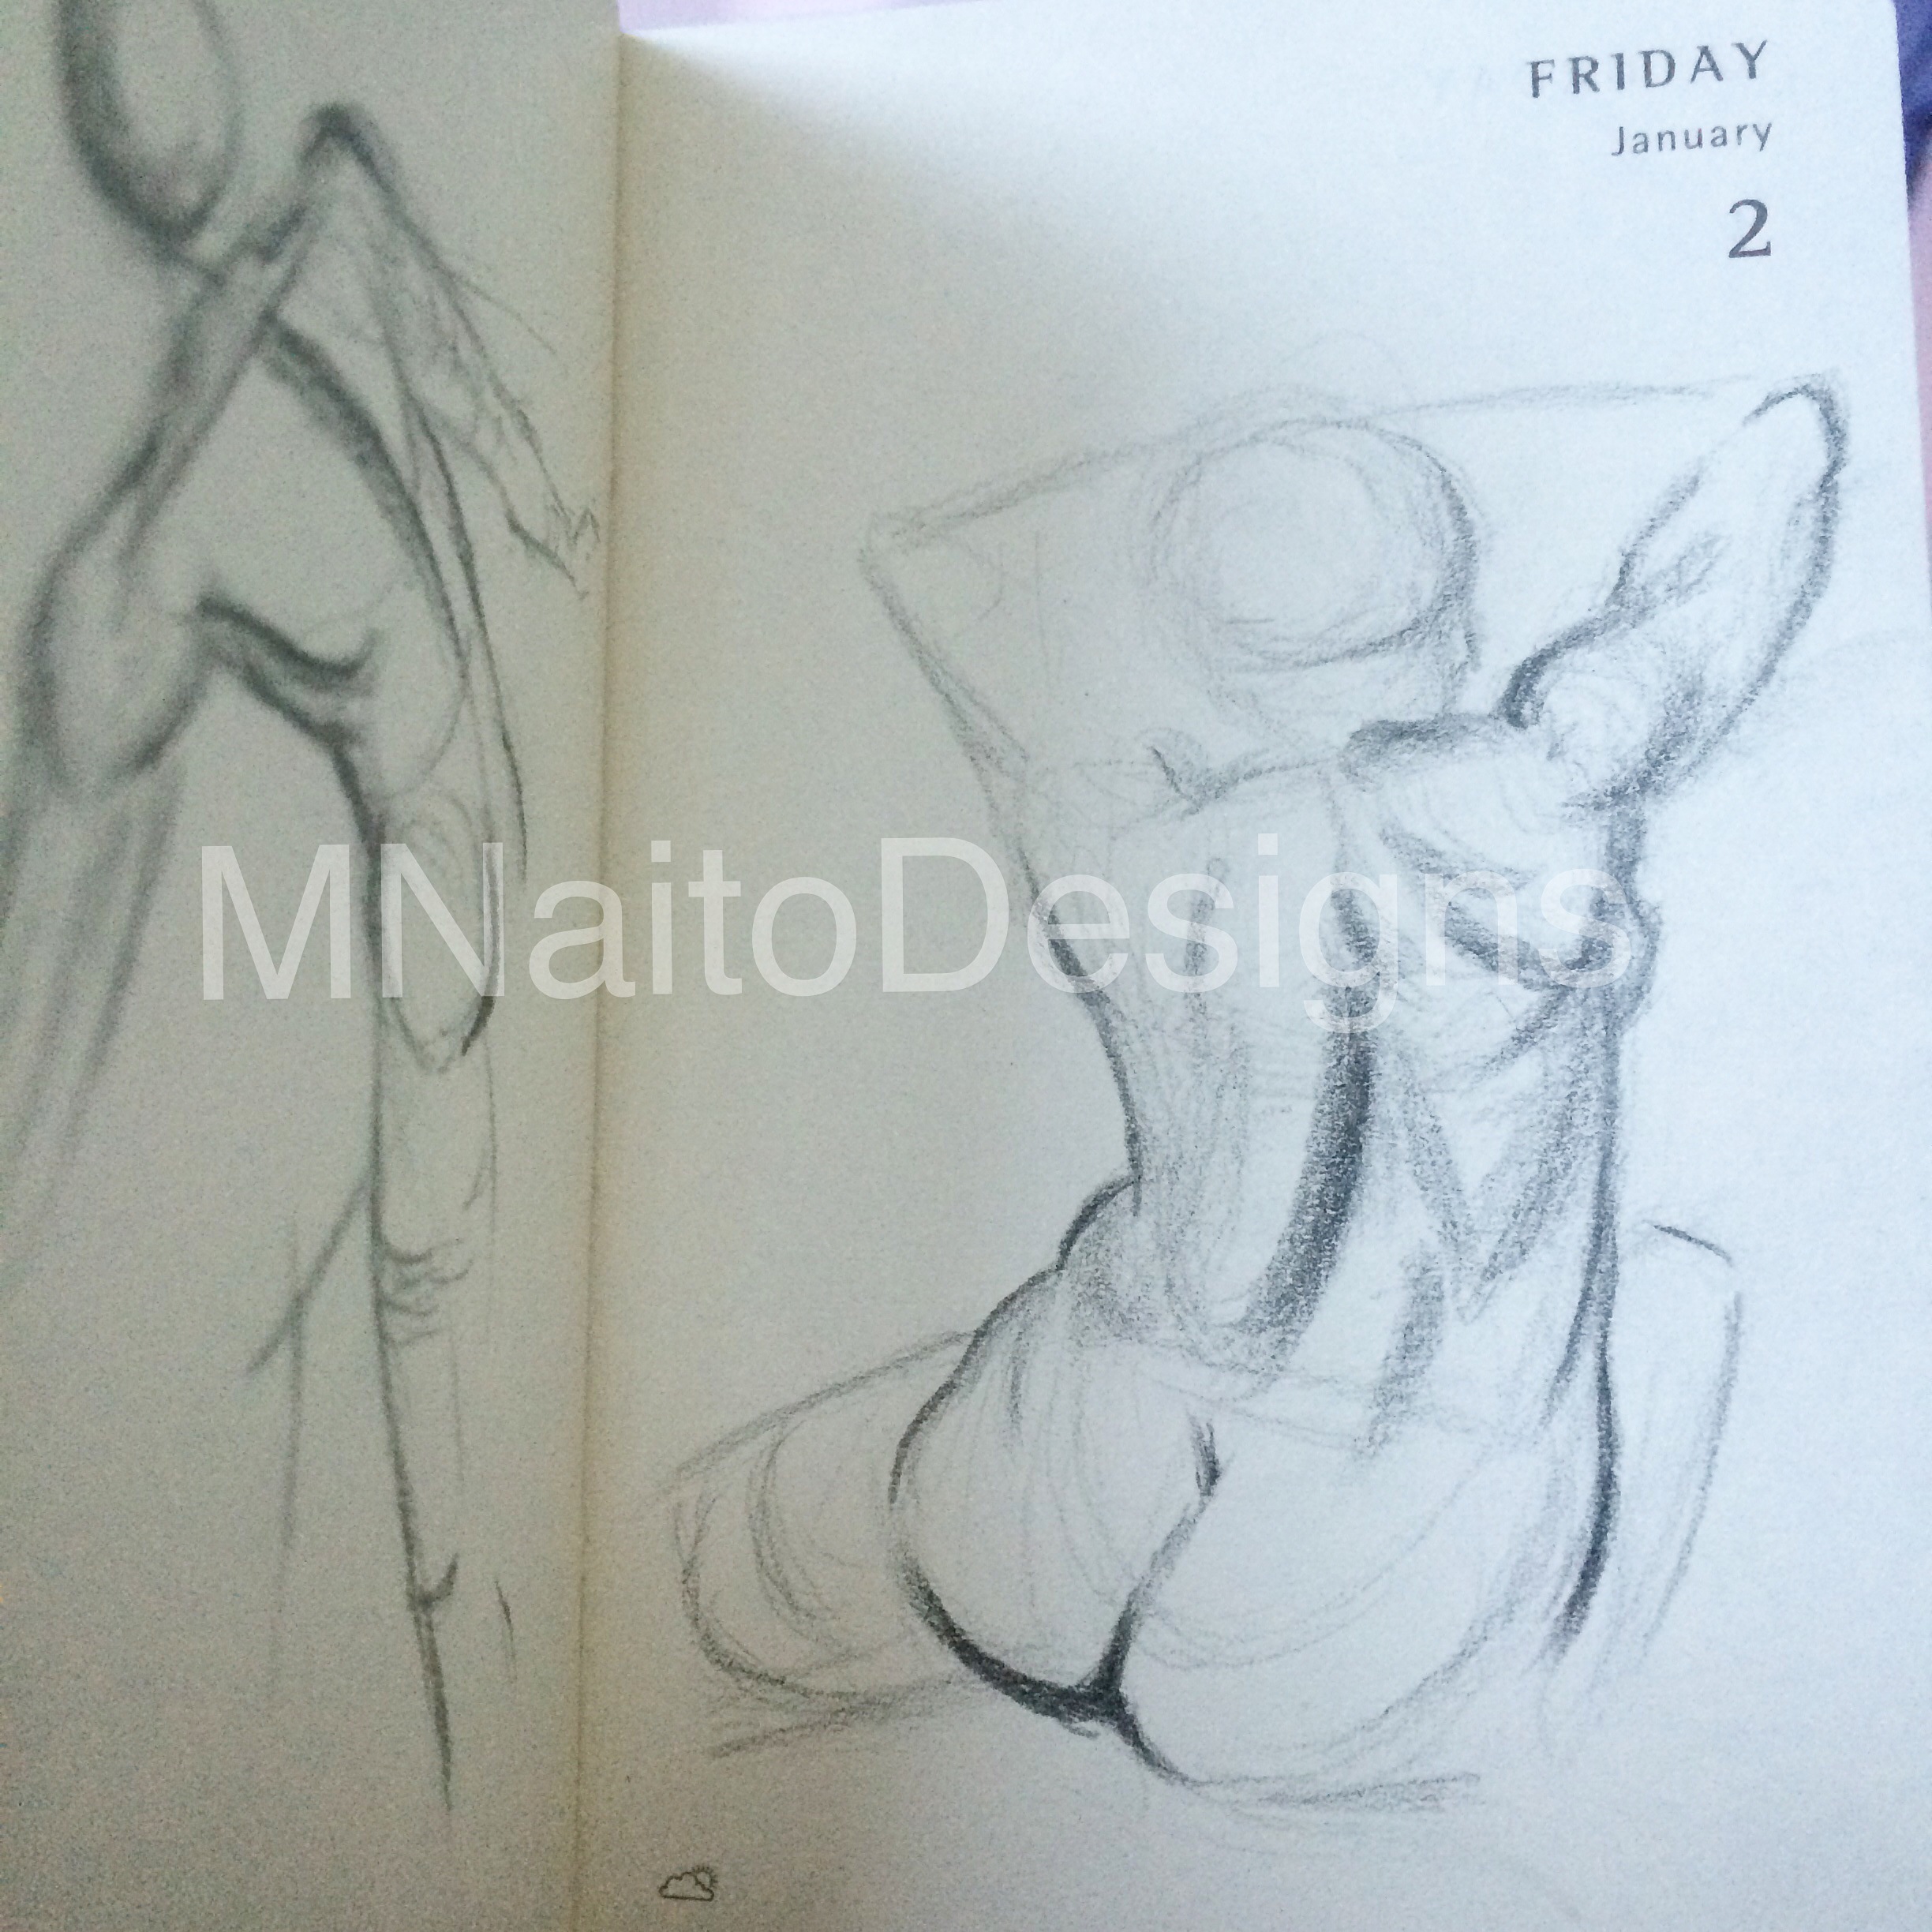 Daily Sketch – One Positive Step To Perfecting Your Craft